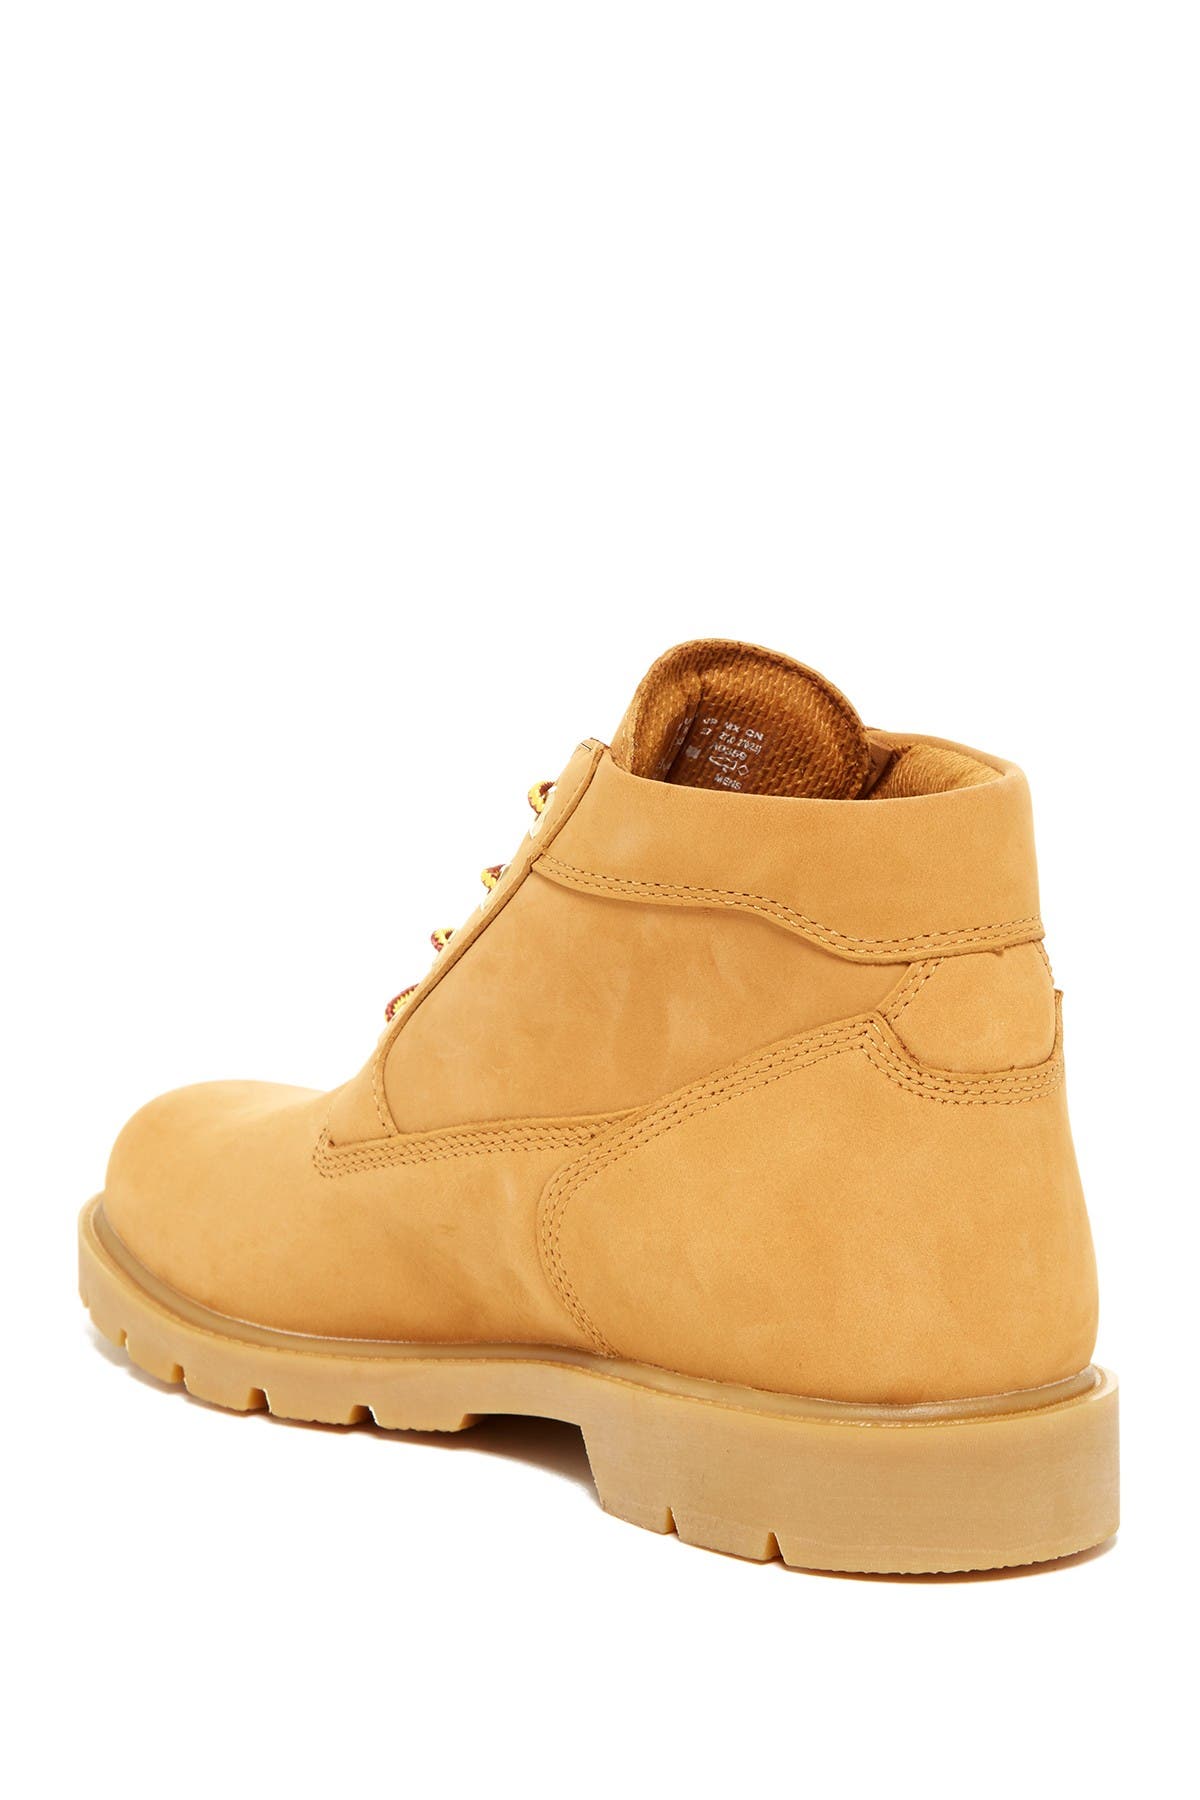 wide width timberland boots